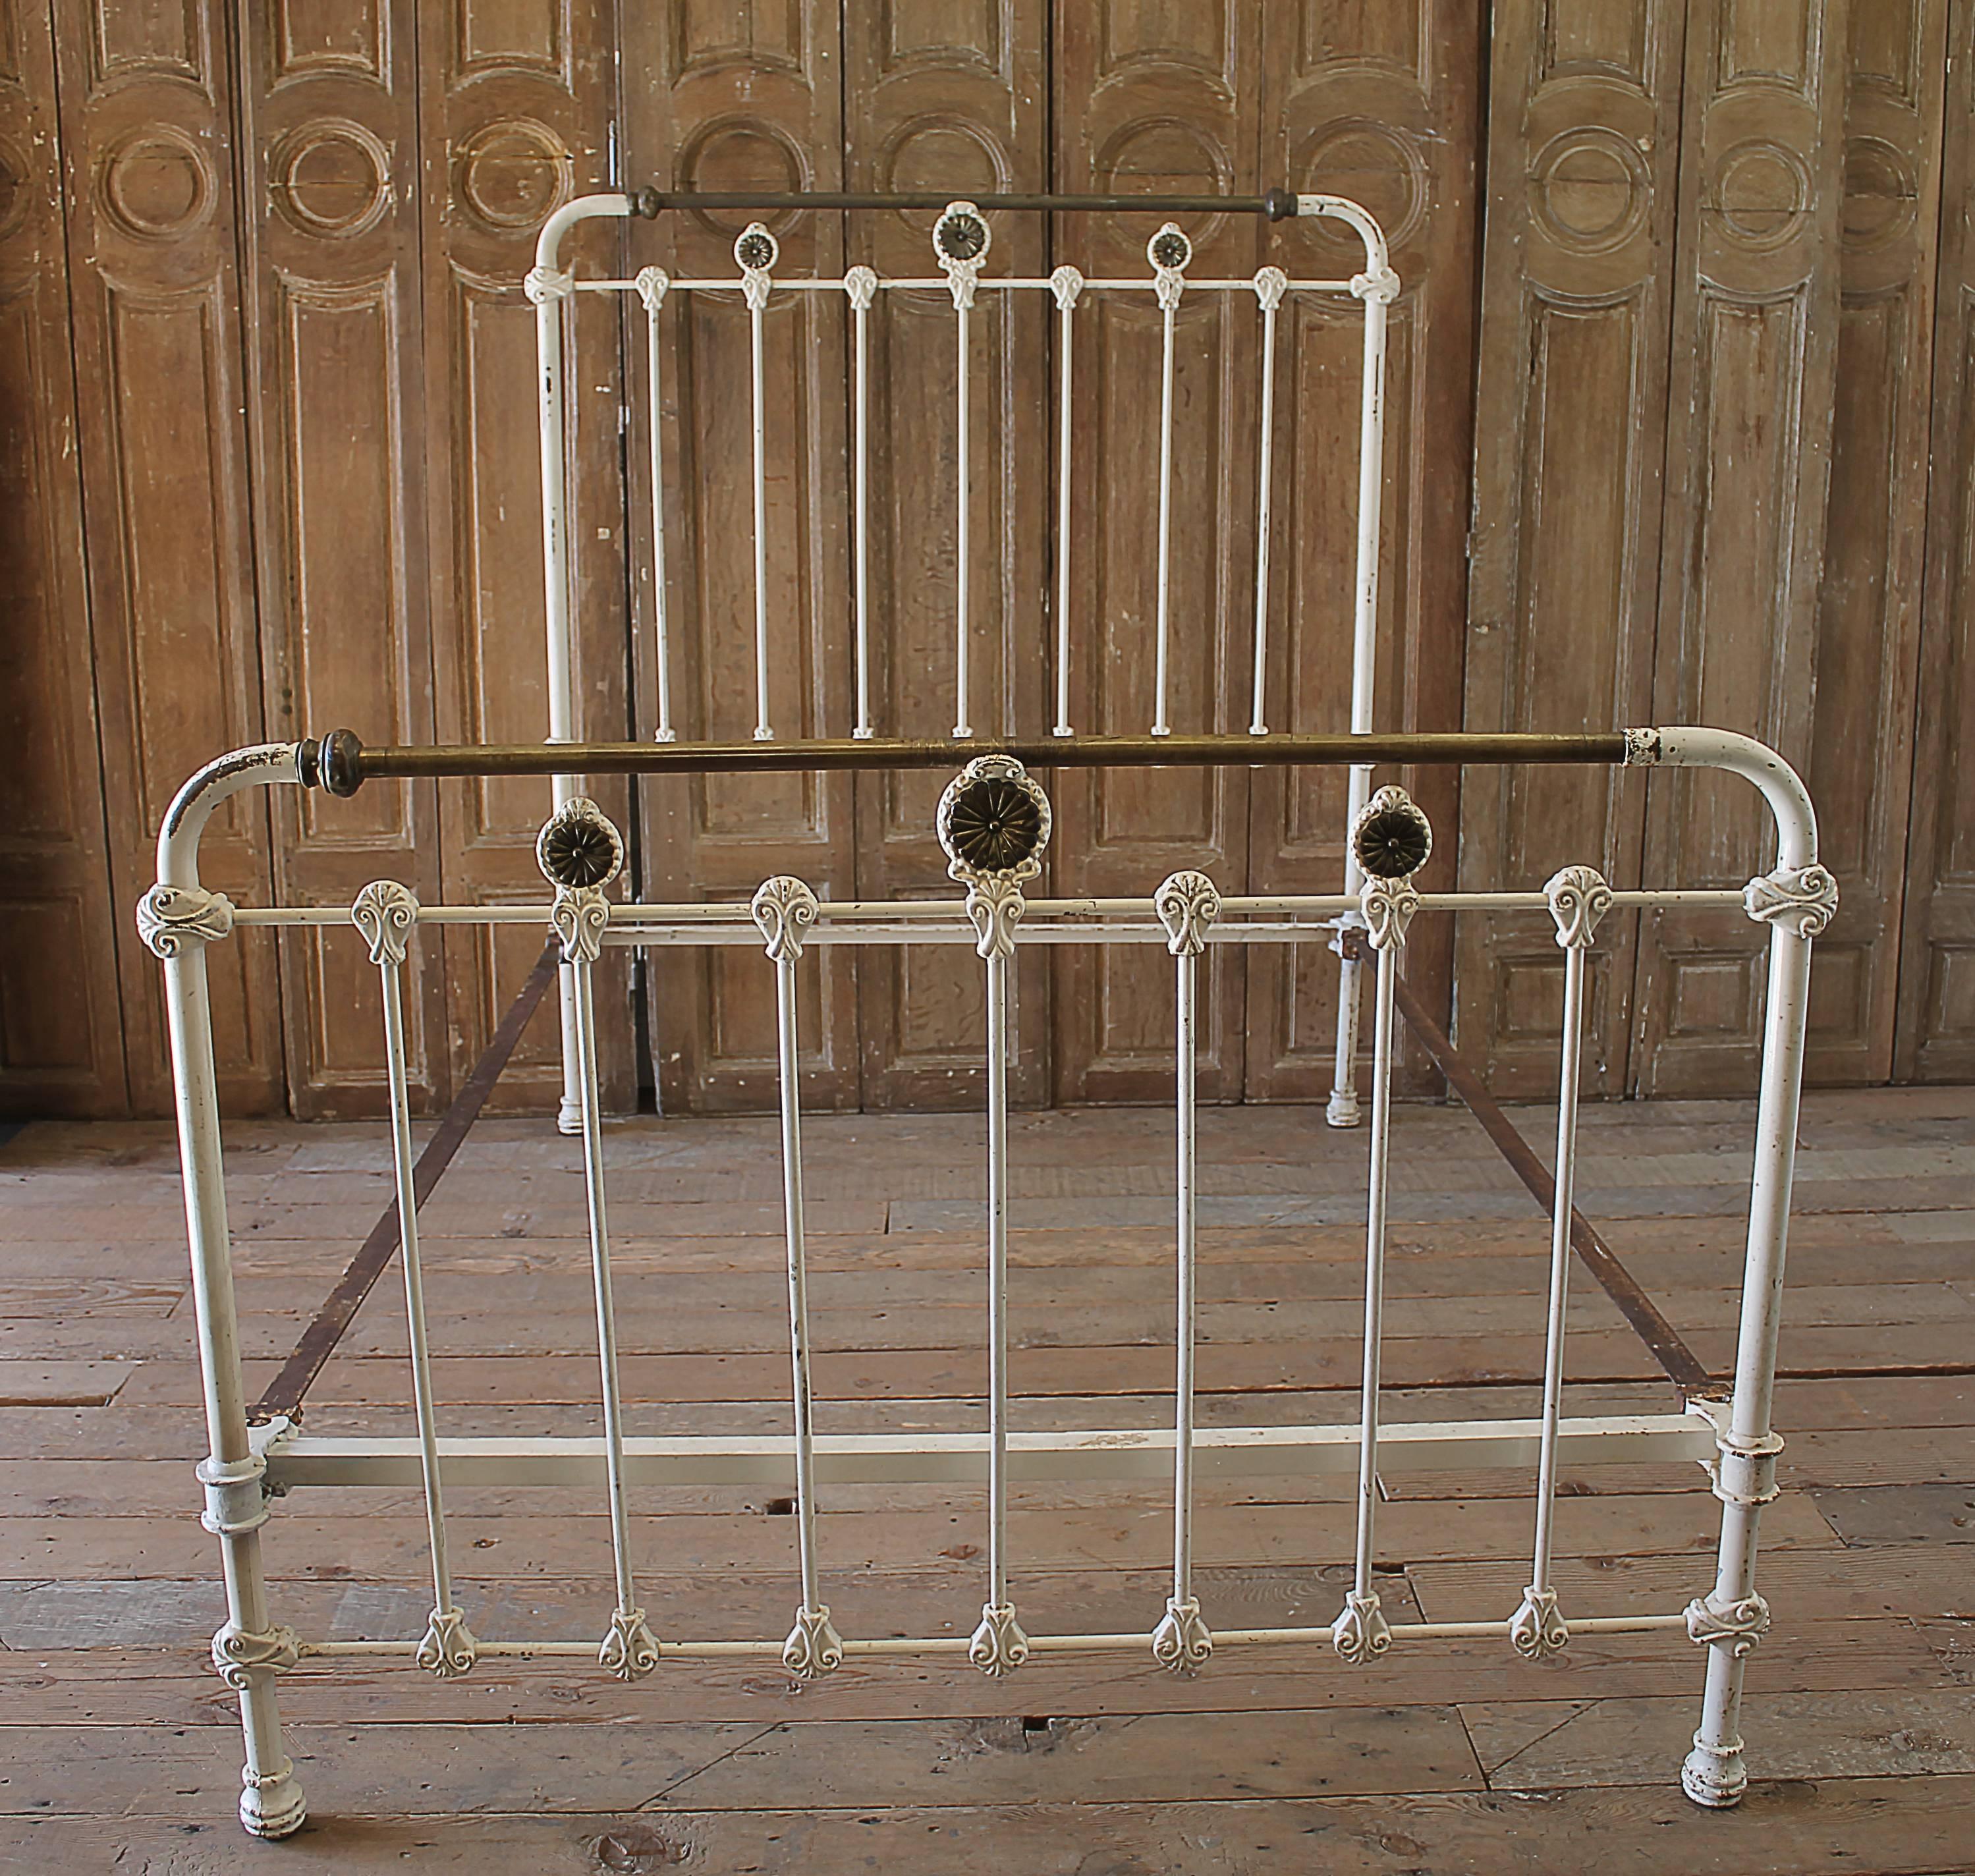 Antique Wrought Iron and Brass Bed Full Size
Original rails, this beautiful original painted bed is a creamy white color with aged brass details.
Fits a full size mattress, measures:55